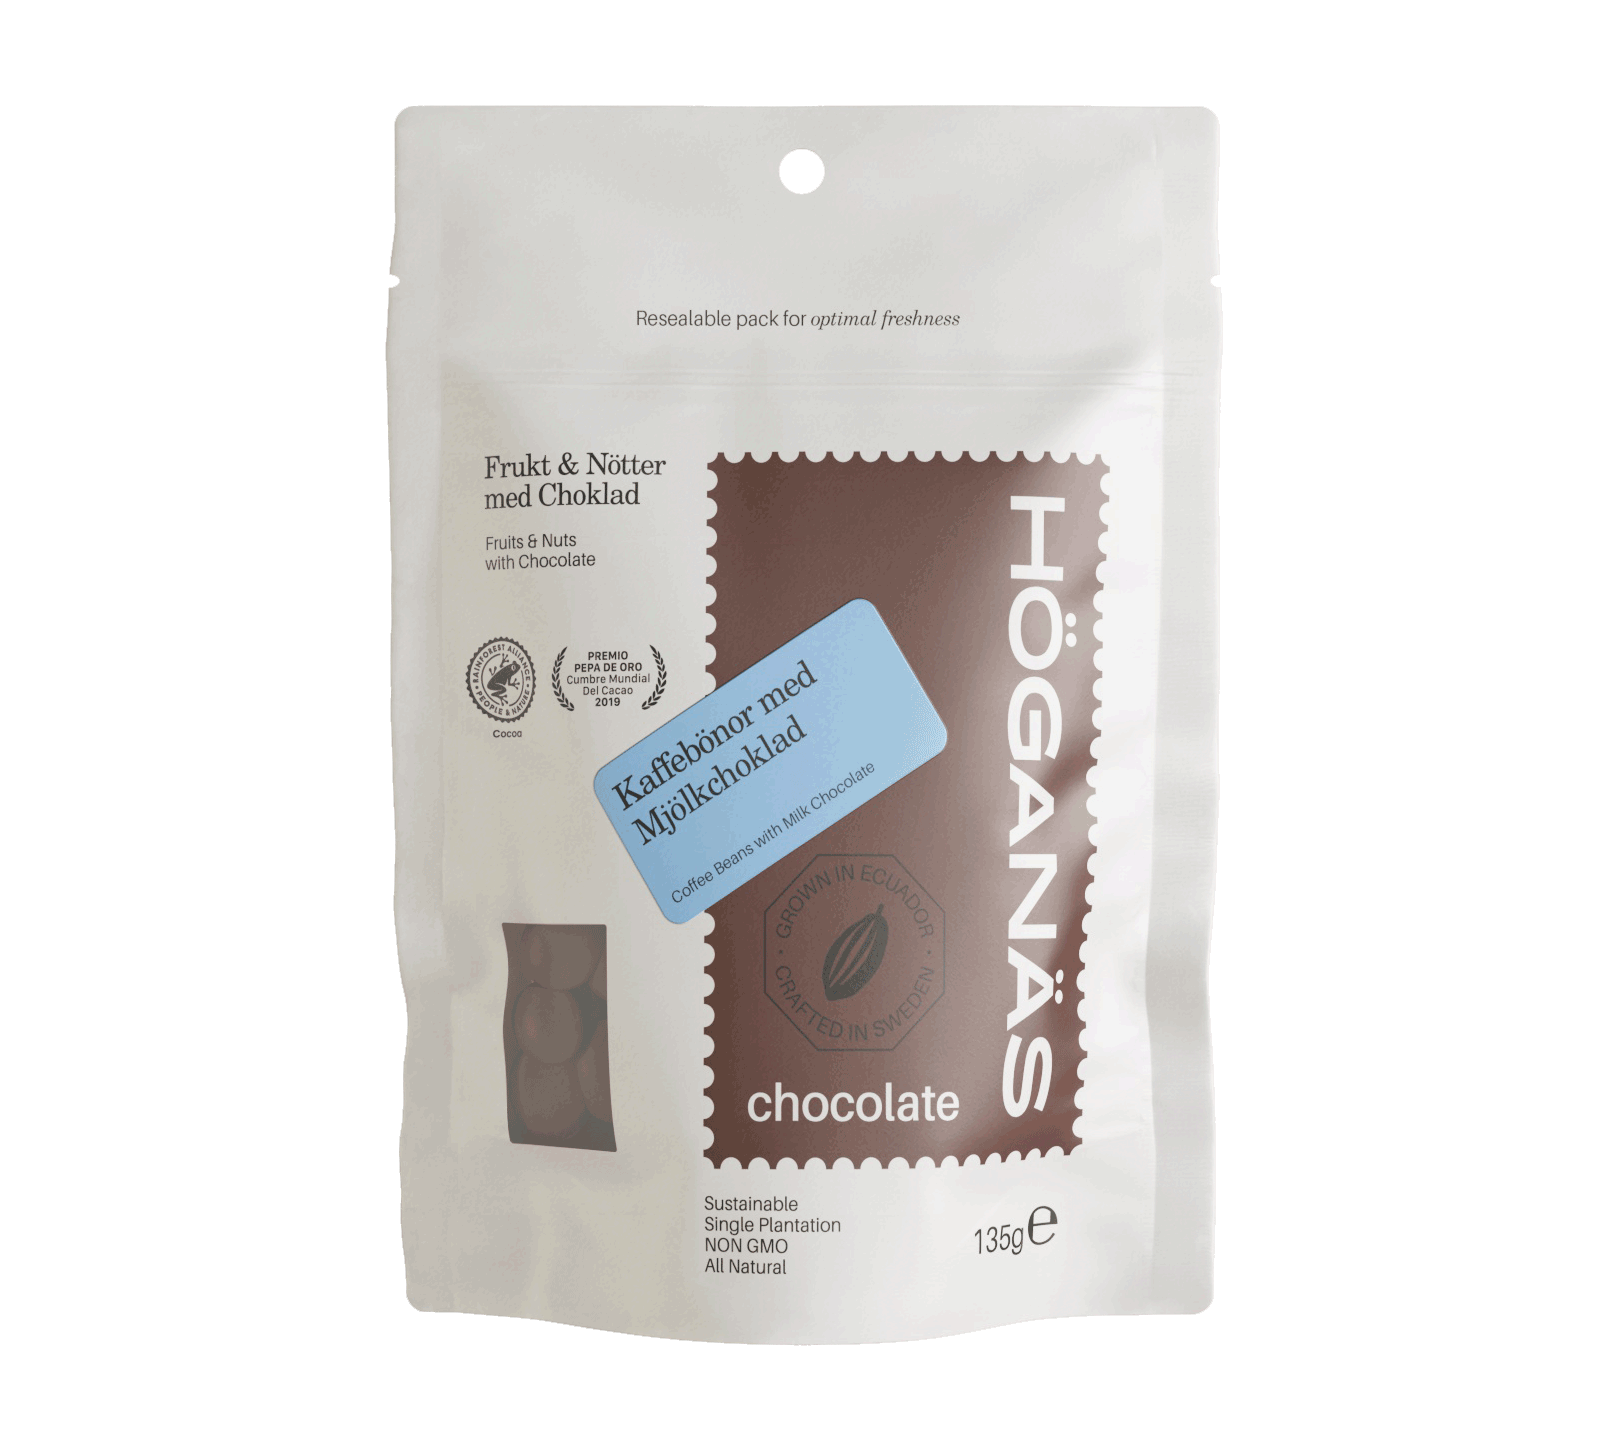 Hoganas_Chocolate_Roasted_Coffee_Beans_with_36_Milk_Chocolate.png